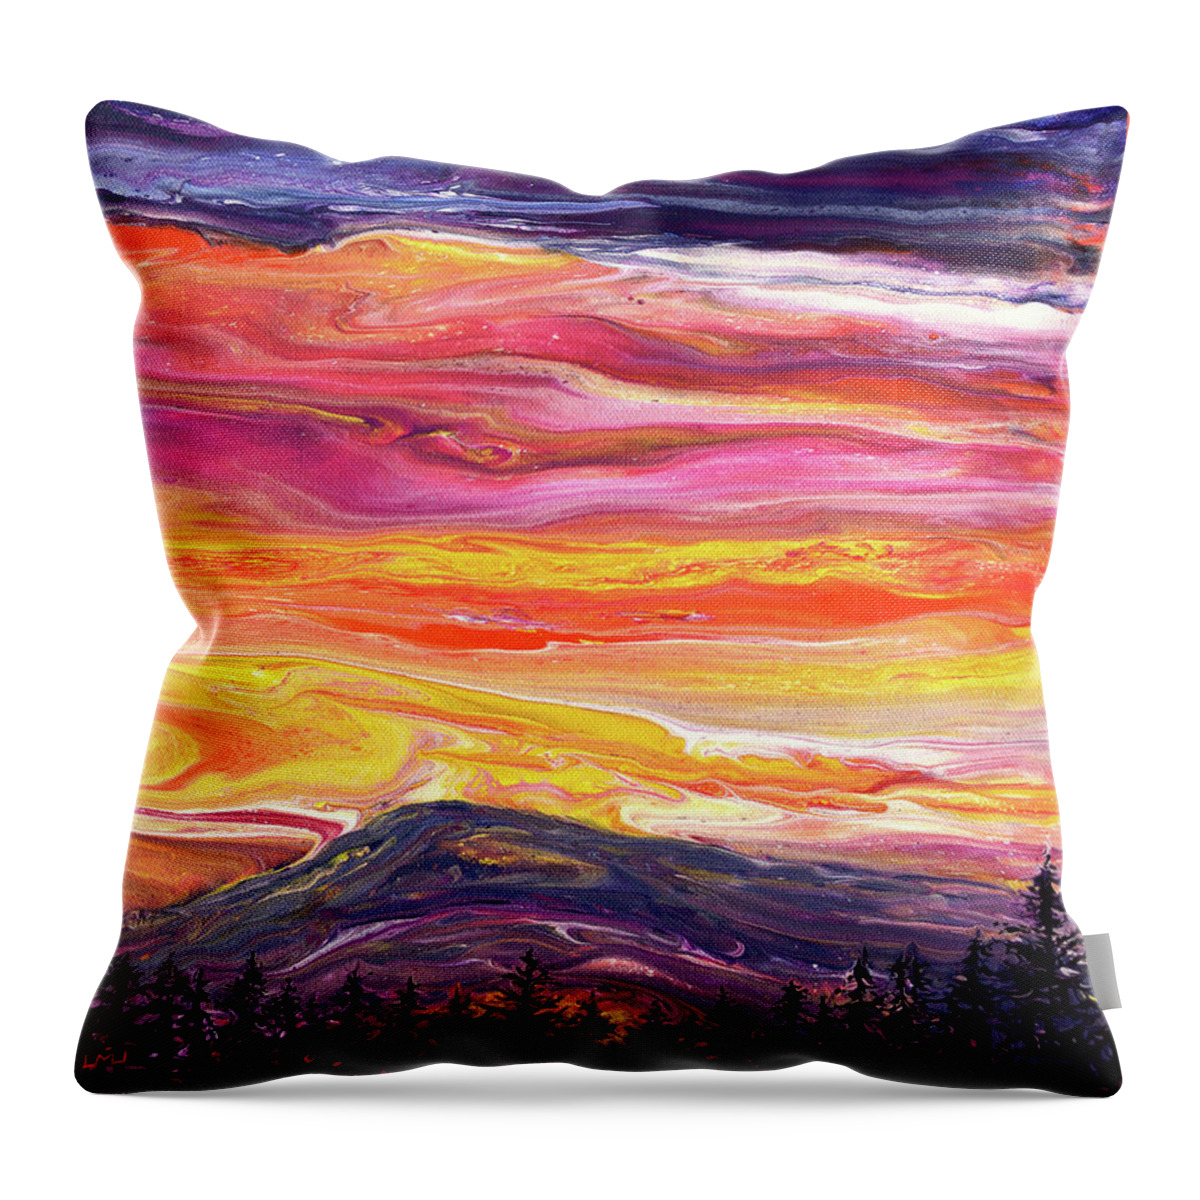 Marys Peak Throw Pillow featuring the painting Sunset Over Mary's Peak by Laura Iverson